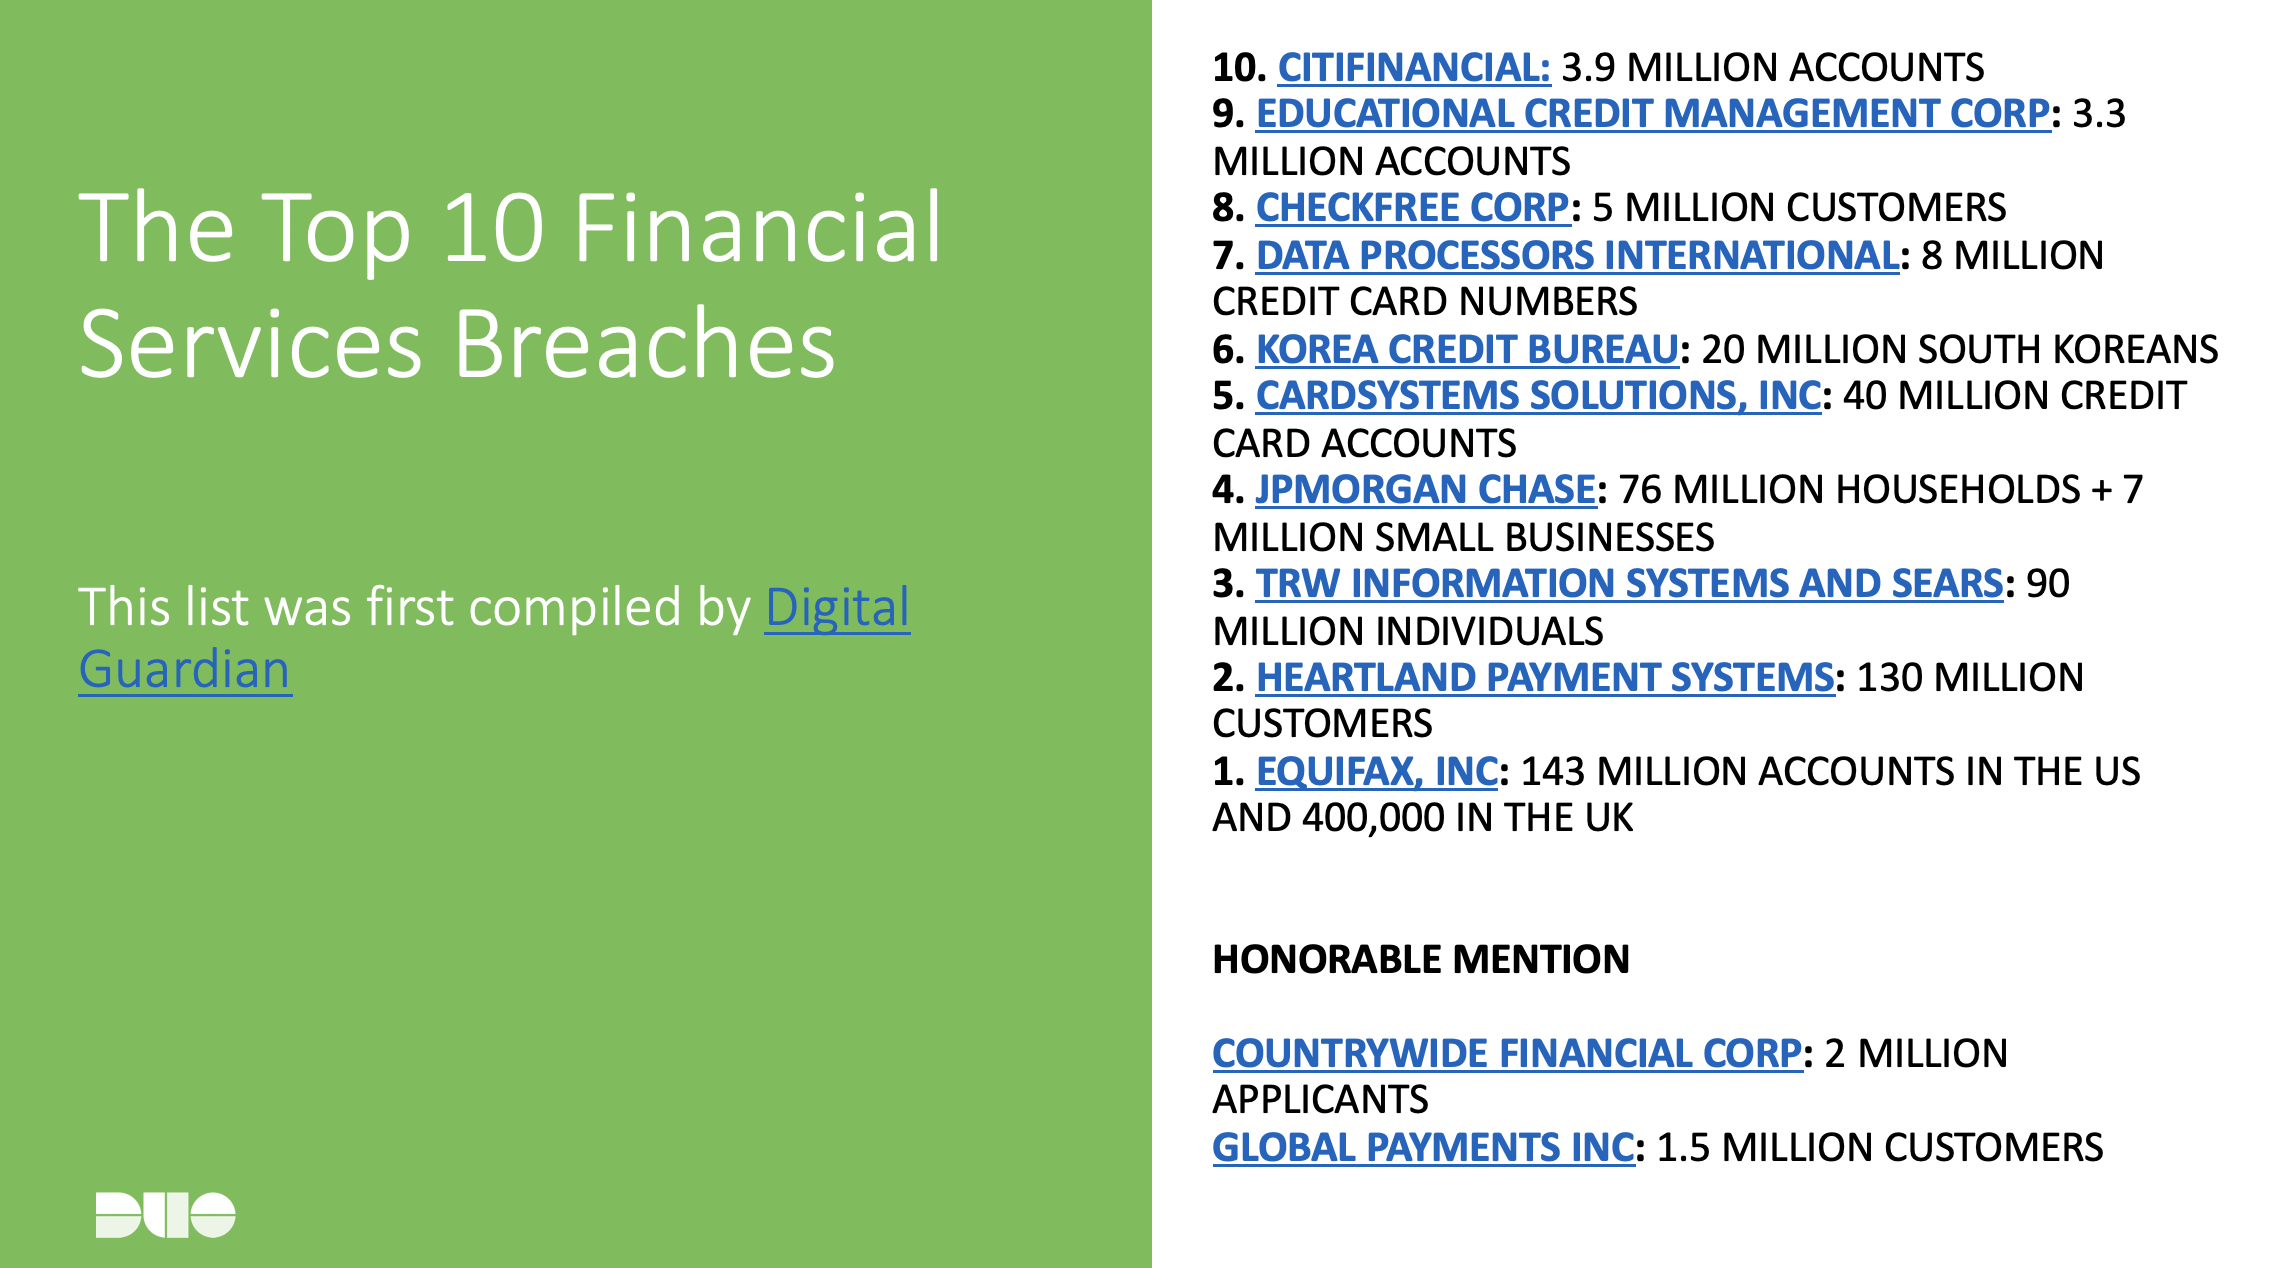 The top 10 financial services breaches: this list was compiled by Digital Guardian and includes Equifax, Inc. in number one with 143 million accounts in the US.